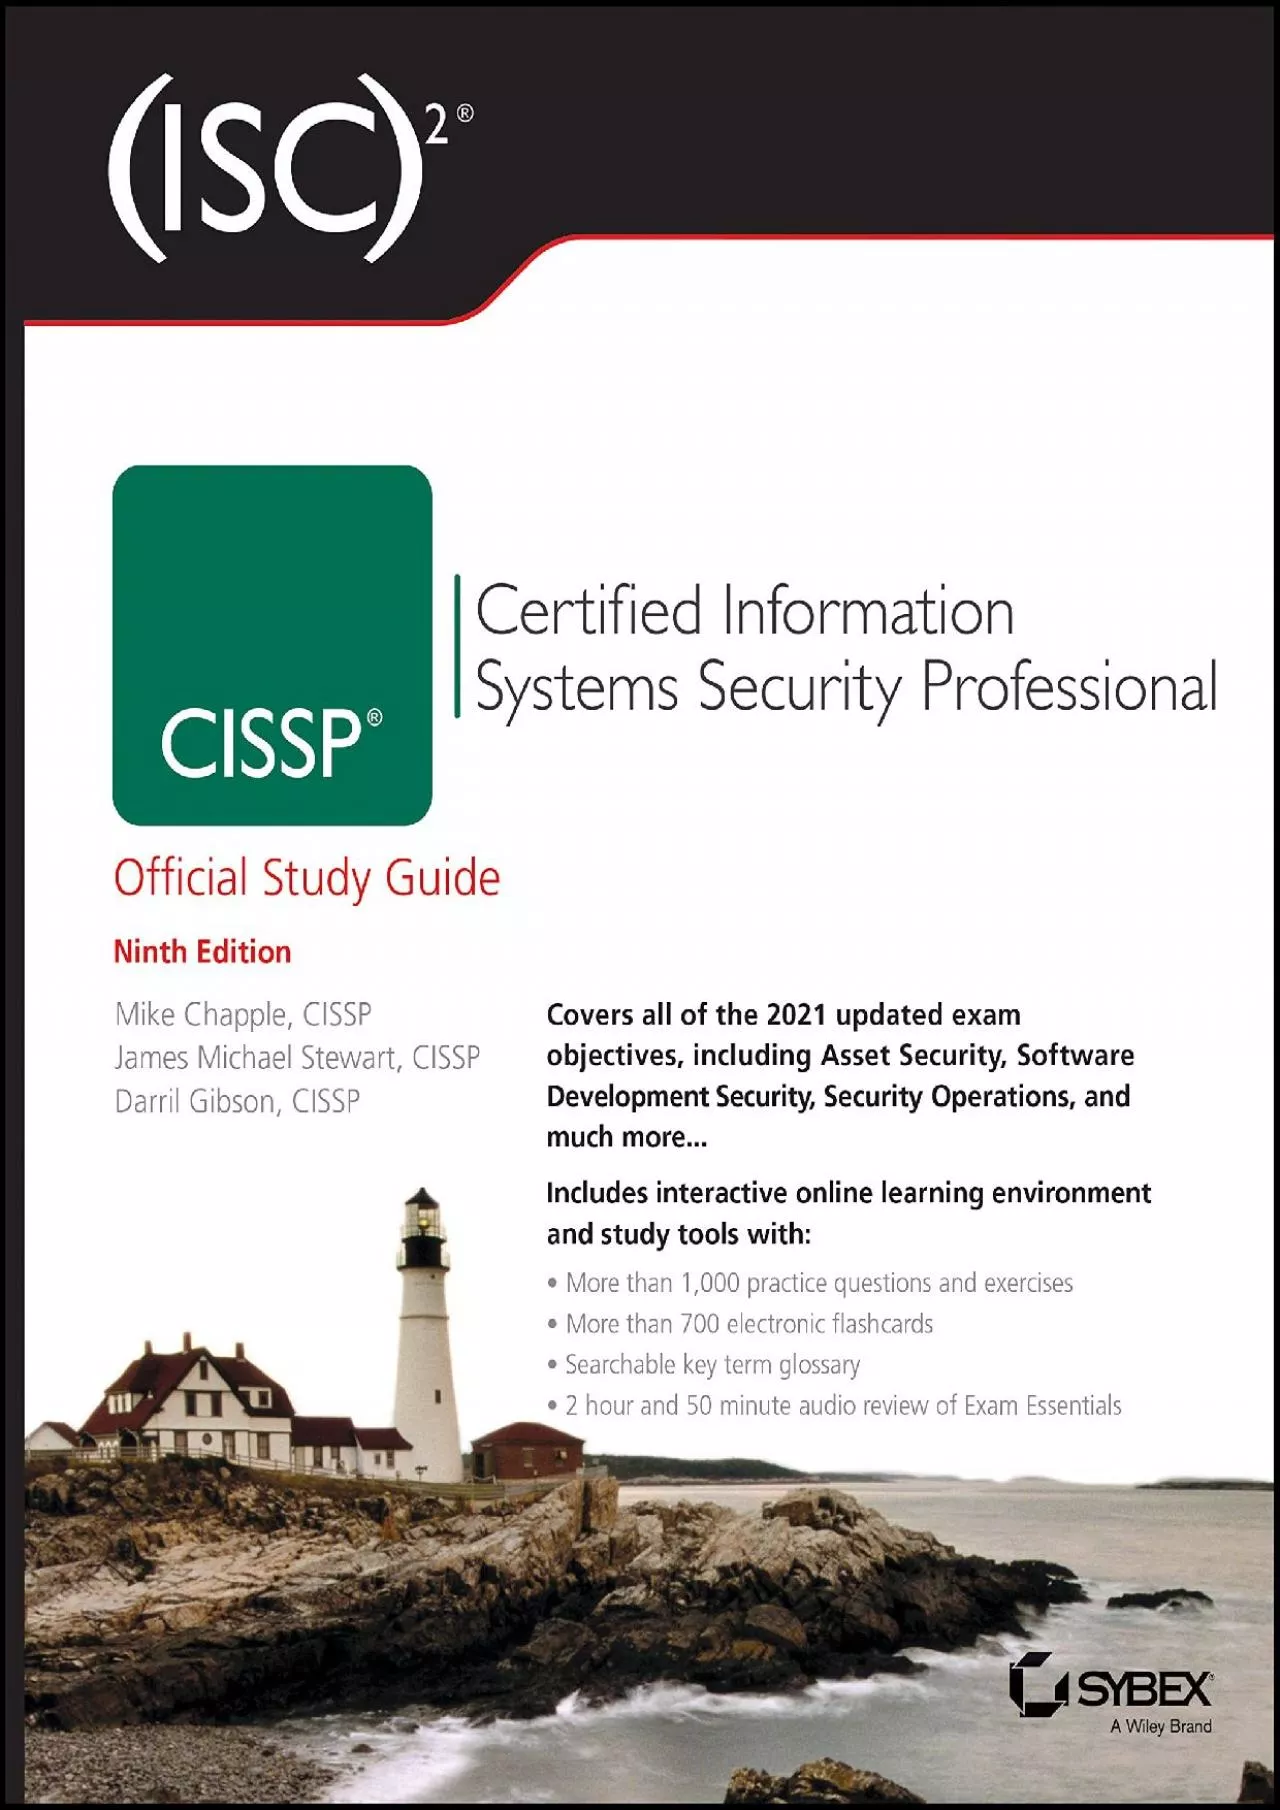 (EBOOK)-(ISC)2 CISSP Certified Information Systems Security Professional Official Study